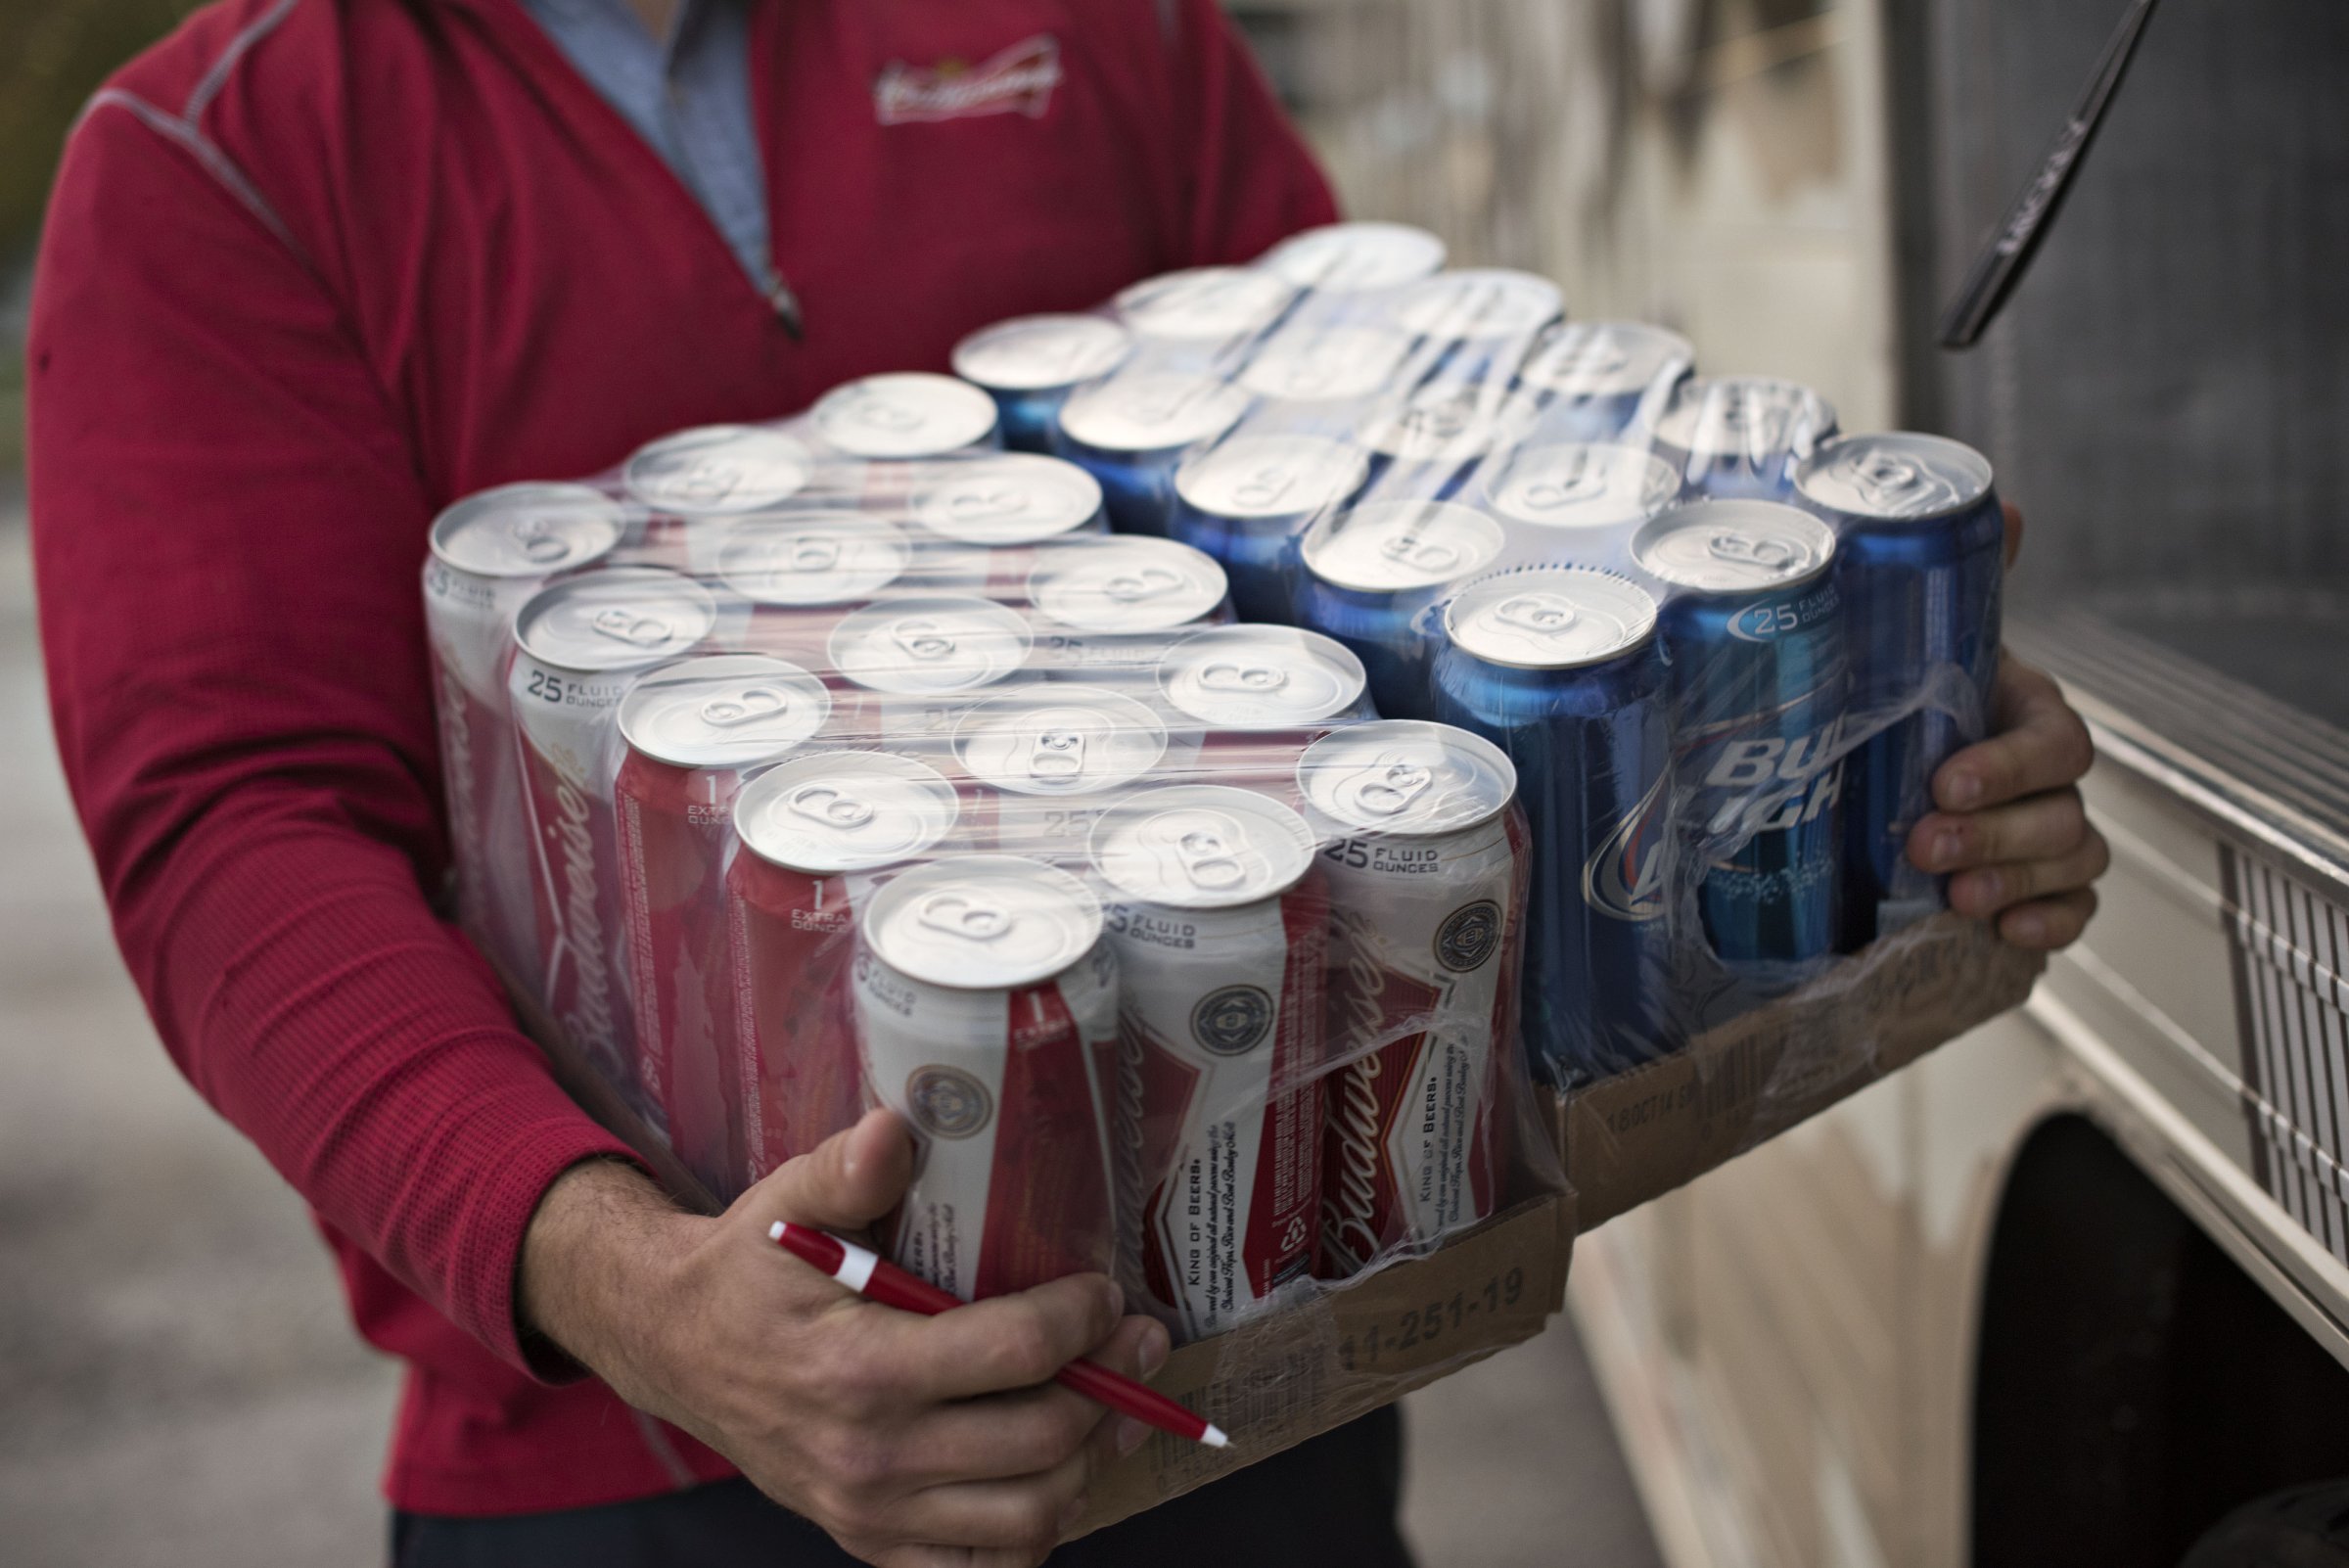 Anheuser-Busch InBev NV Products Ahead Of Earnings Data